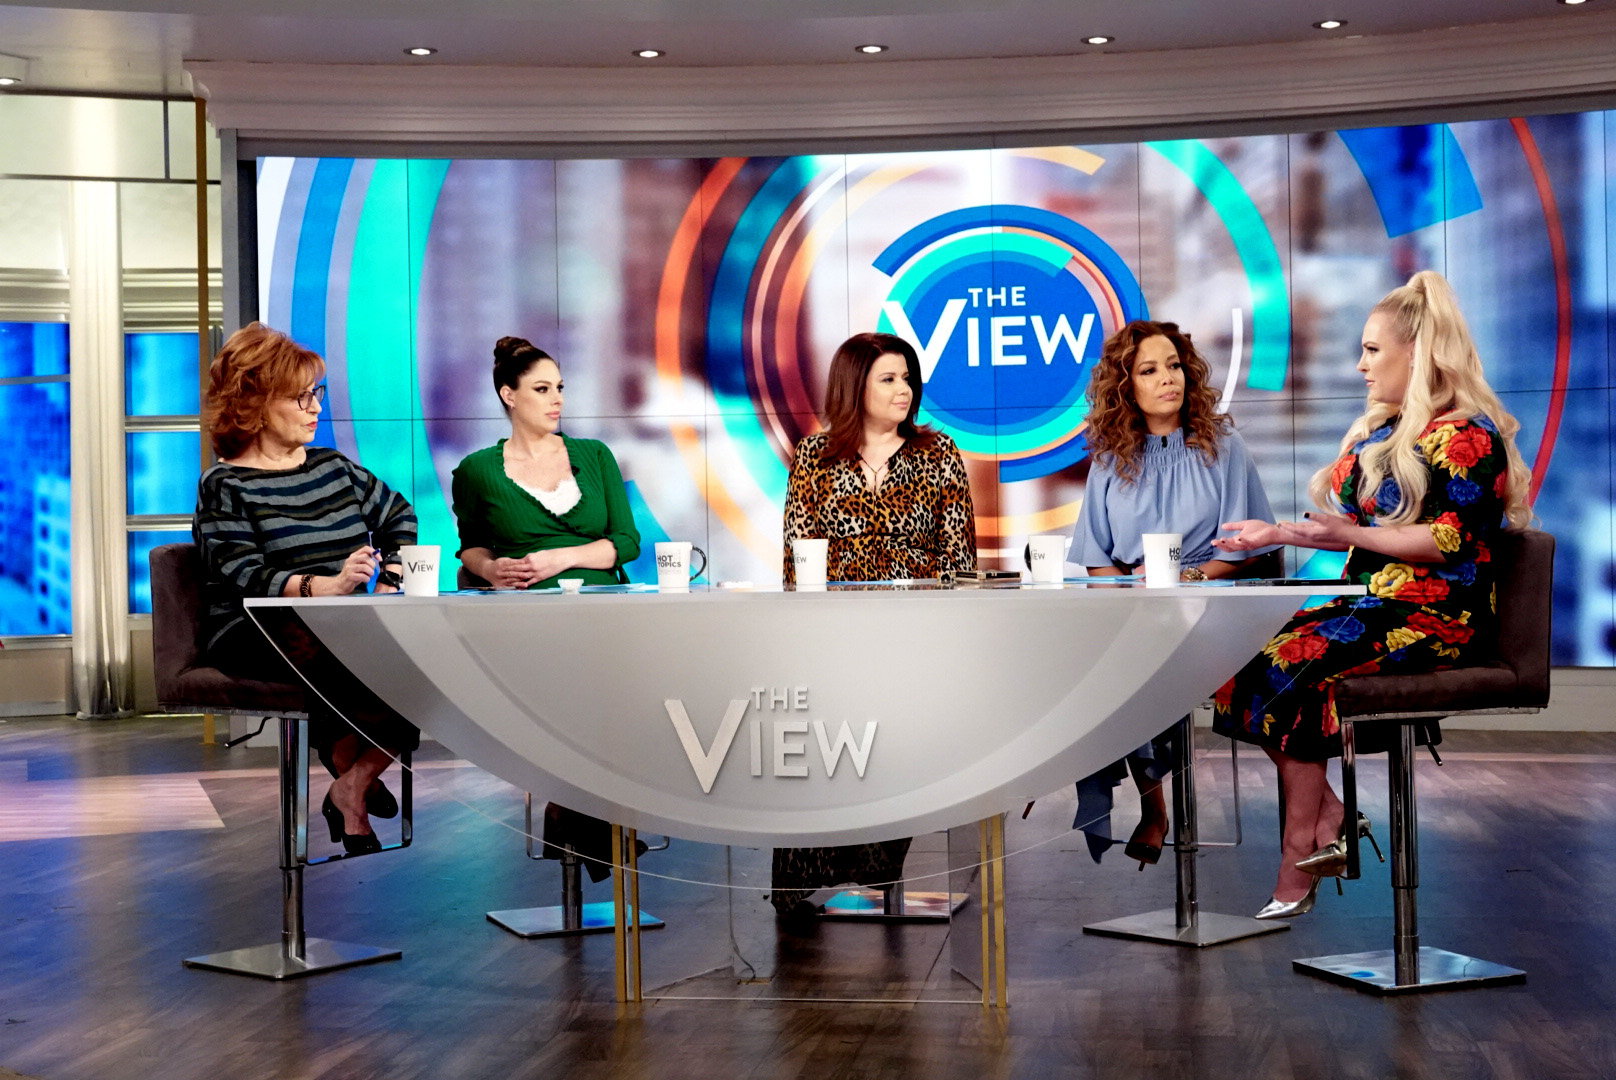 PHOTO: "The View" co-hosts discuss the recent developments of Jussie Smollett's alleged false police report on Feb. 21, 2019.